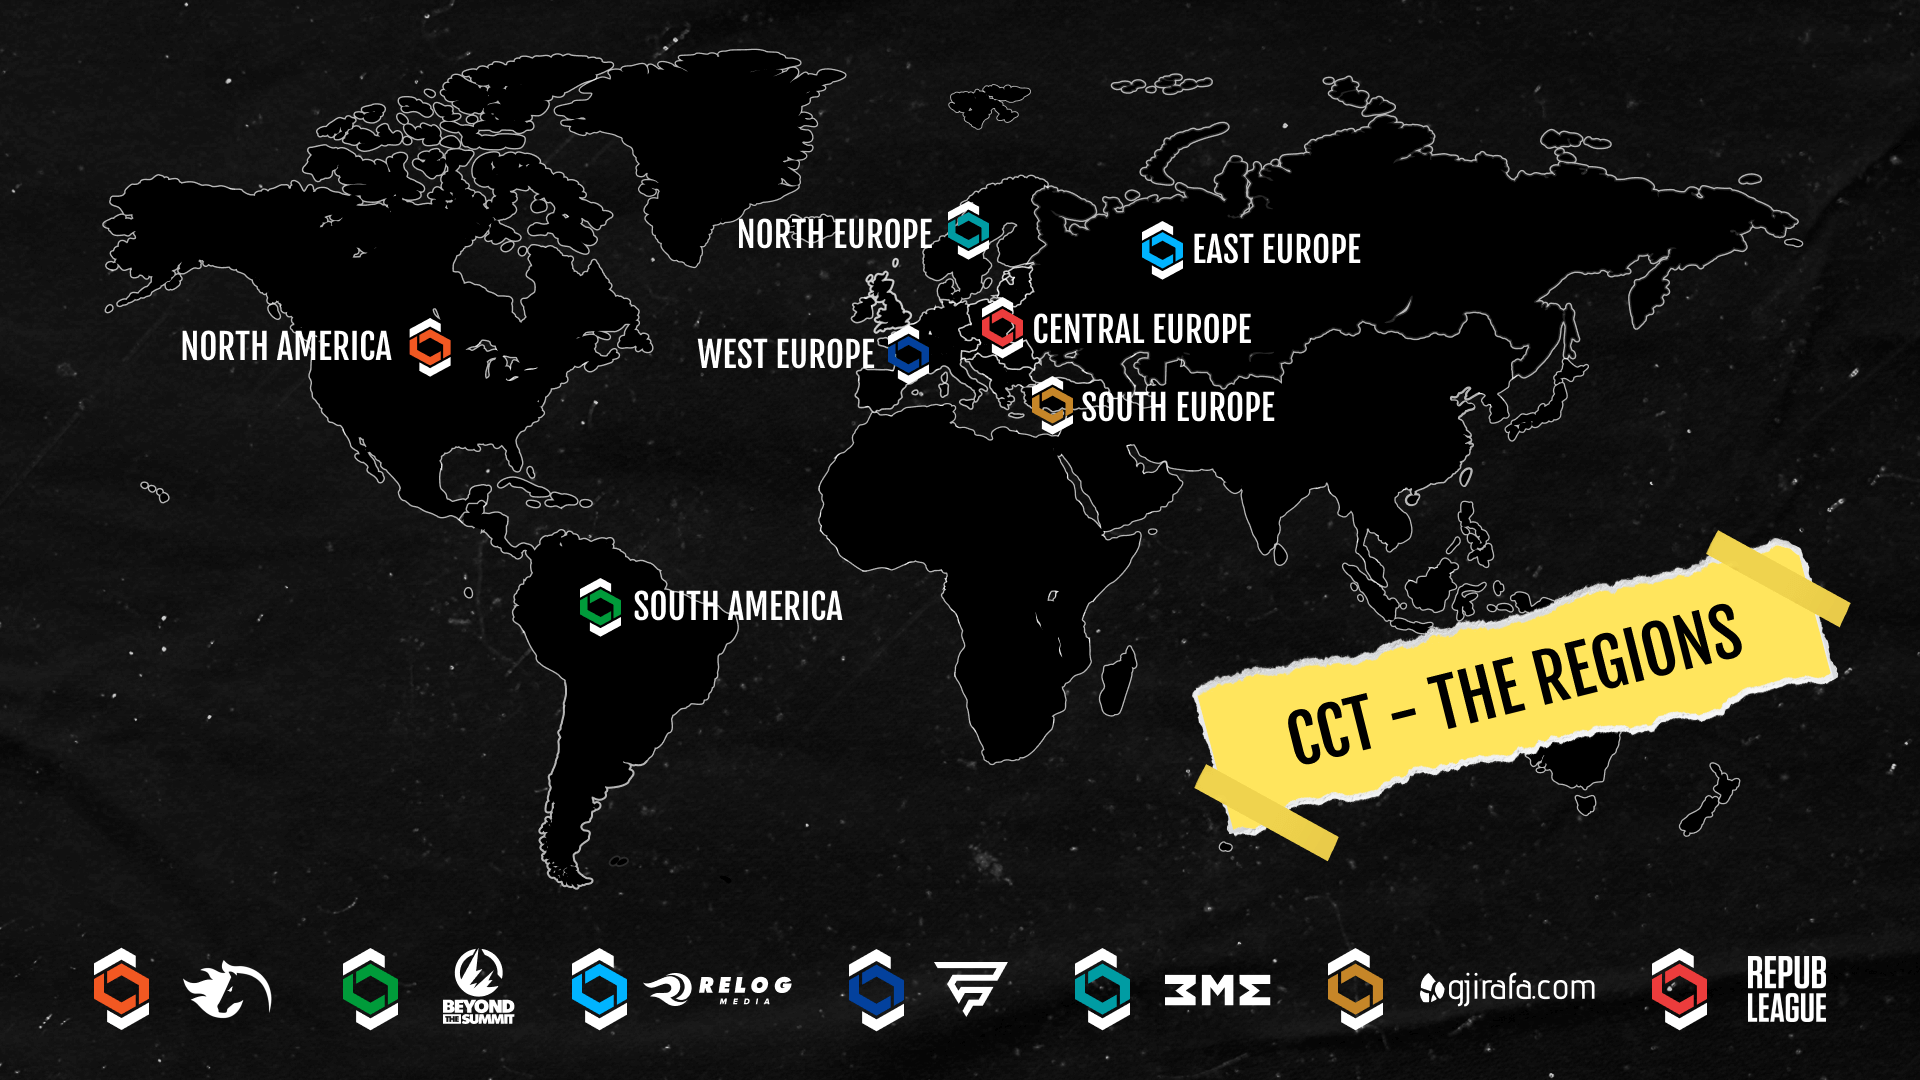 Champions of Champions Tour global CSGO fragster grid faceit relog media tournament revealed map